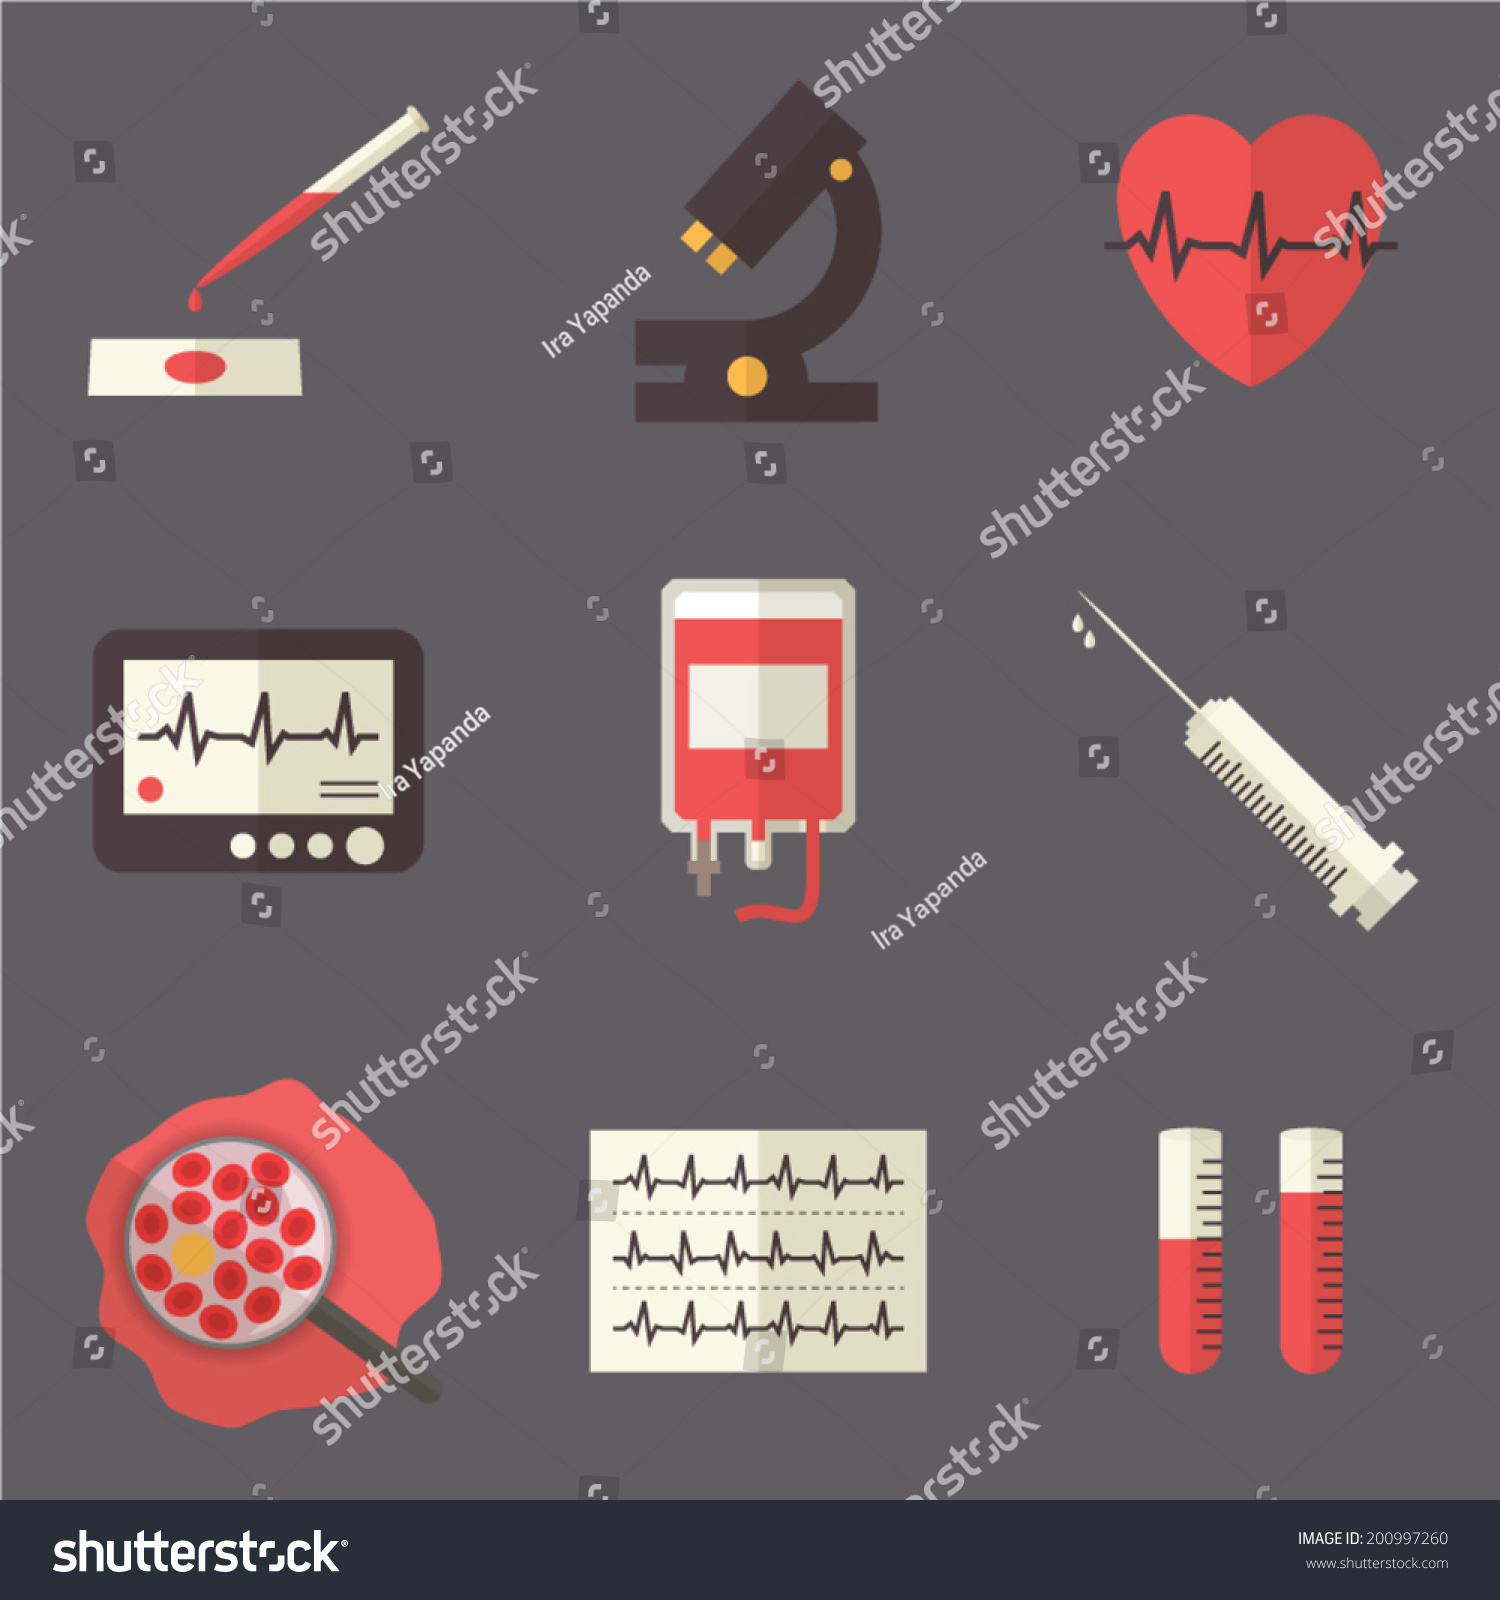 clip art images blood transfusion - photo #23